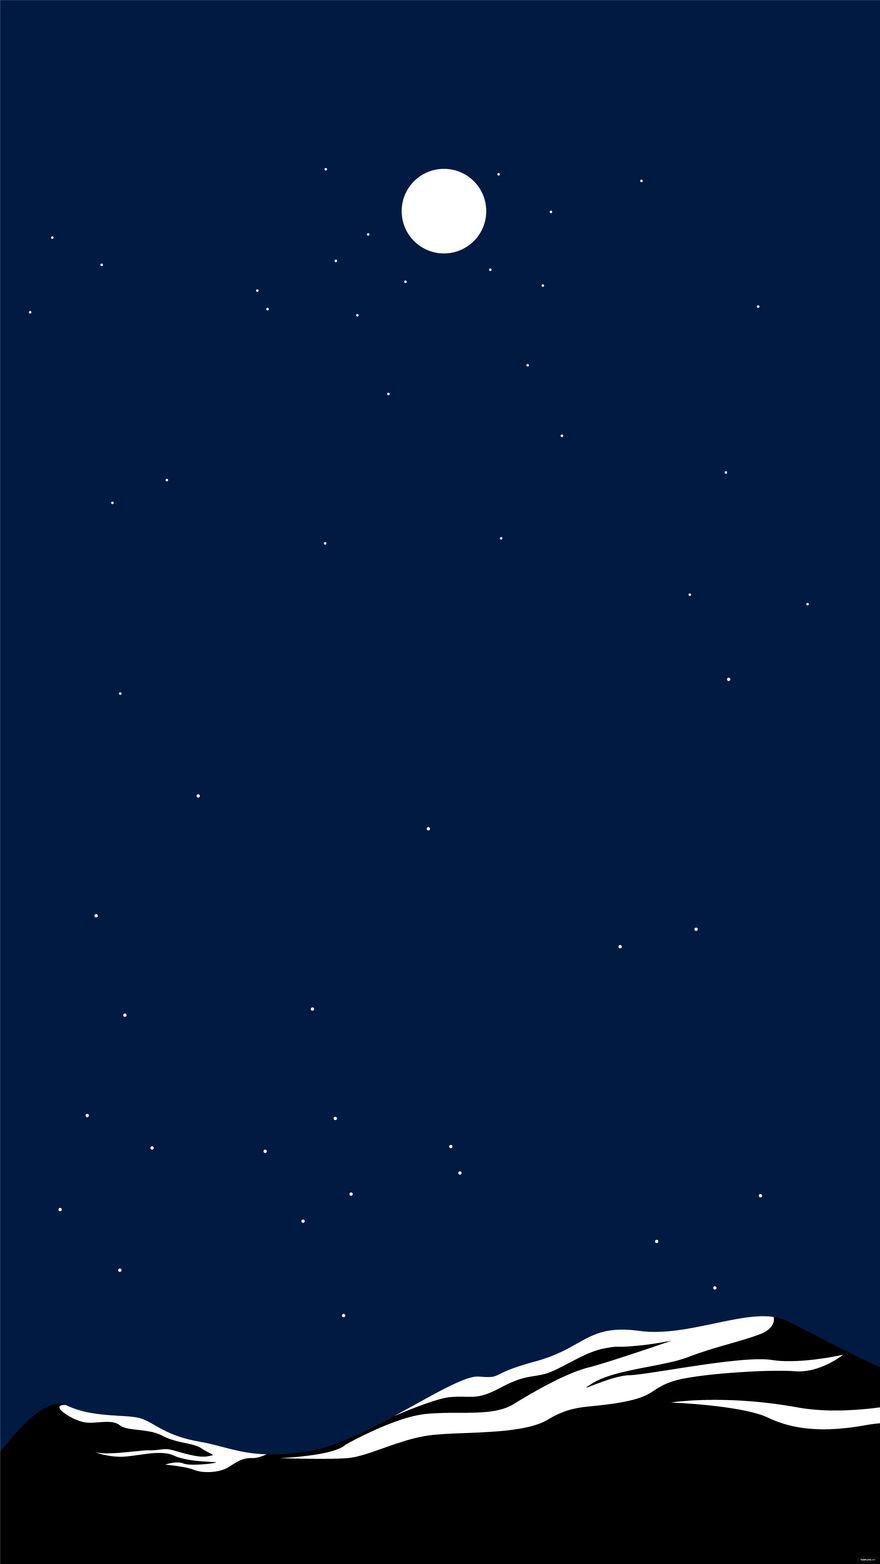 Free Night Sky Iphone Background in Illustrator, EPS, SVG, JPG, PNG